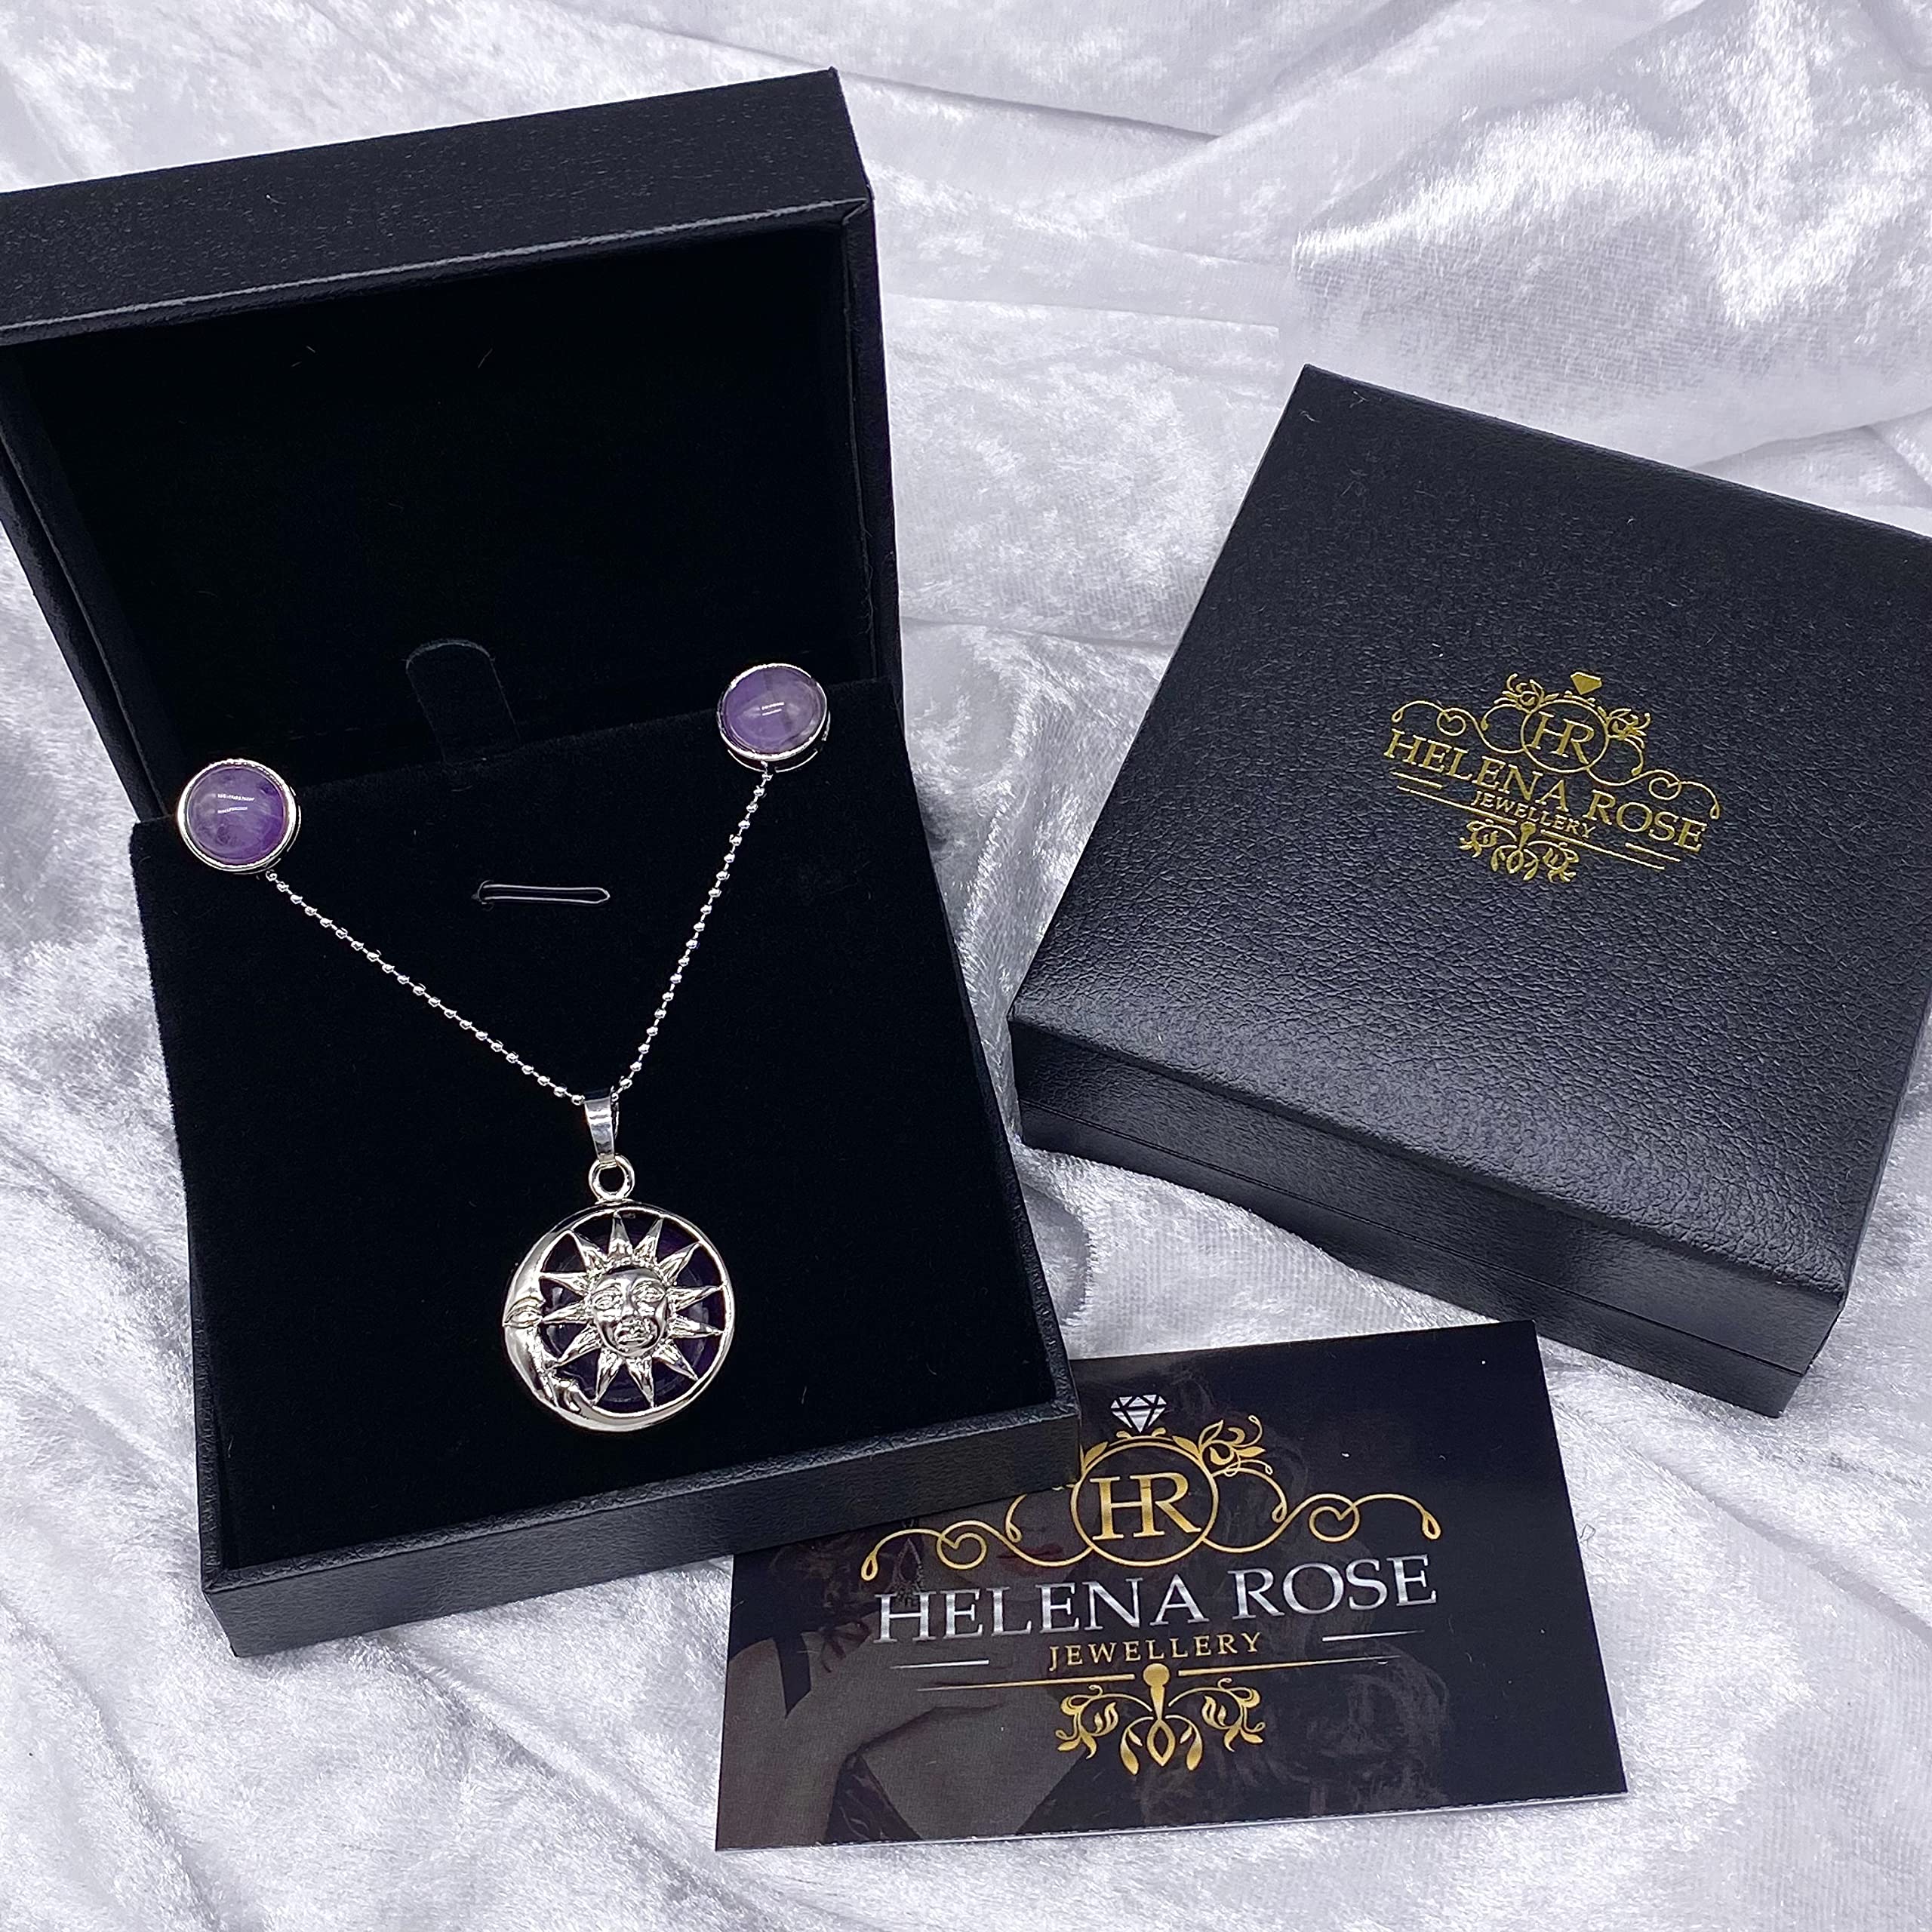 Silver Plate Jewellery Gift Set For Women - Silver Moon Sun Necklace &amp; Earrings - Natural Crystal Gemstone Quartz Pendant For Ladies - With a Quality Gift Box